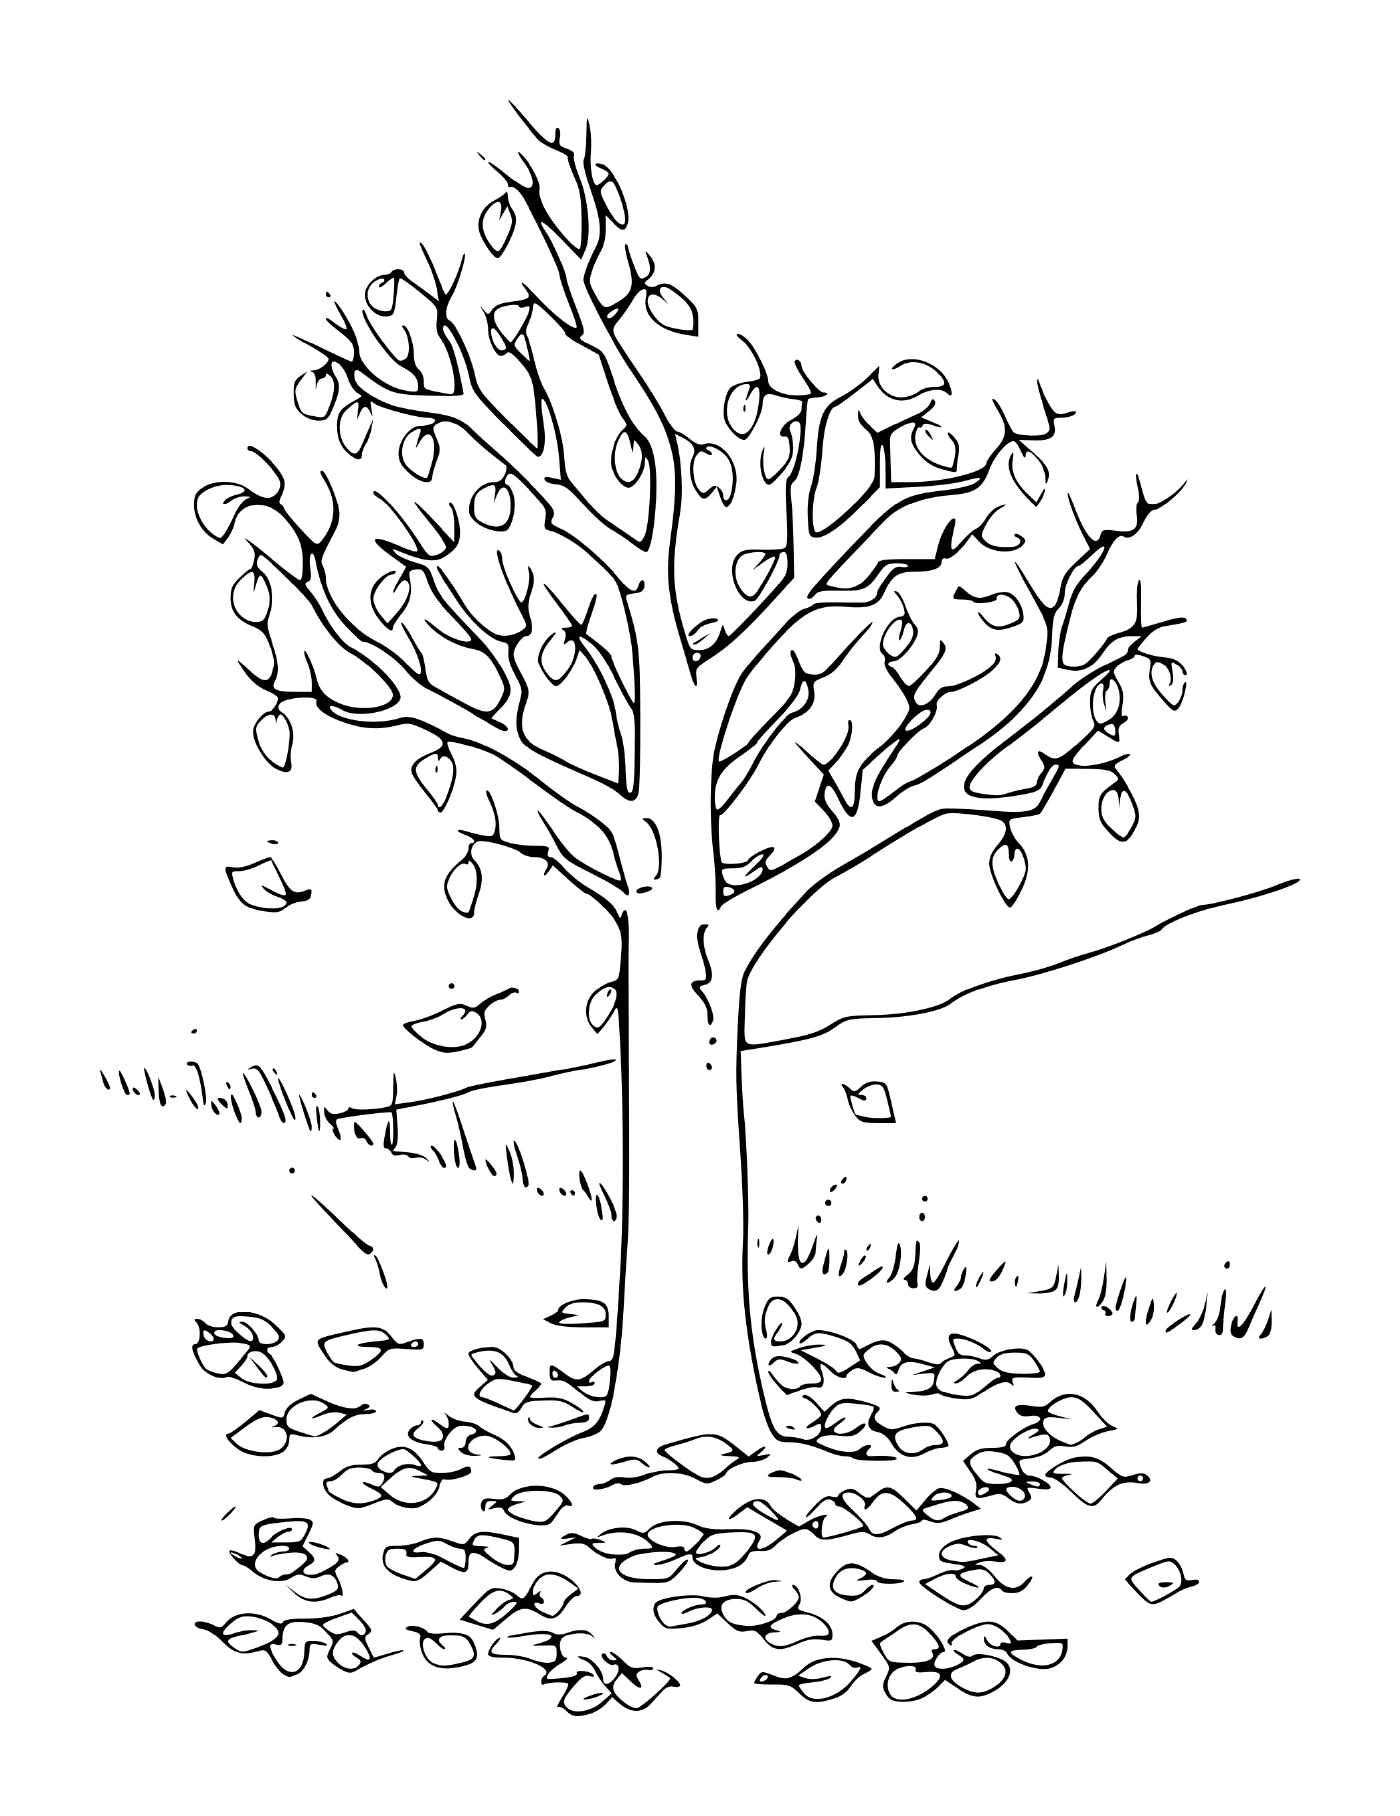  Autumn tree with leaves 